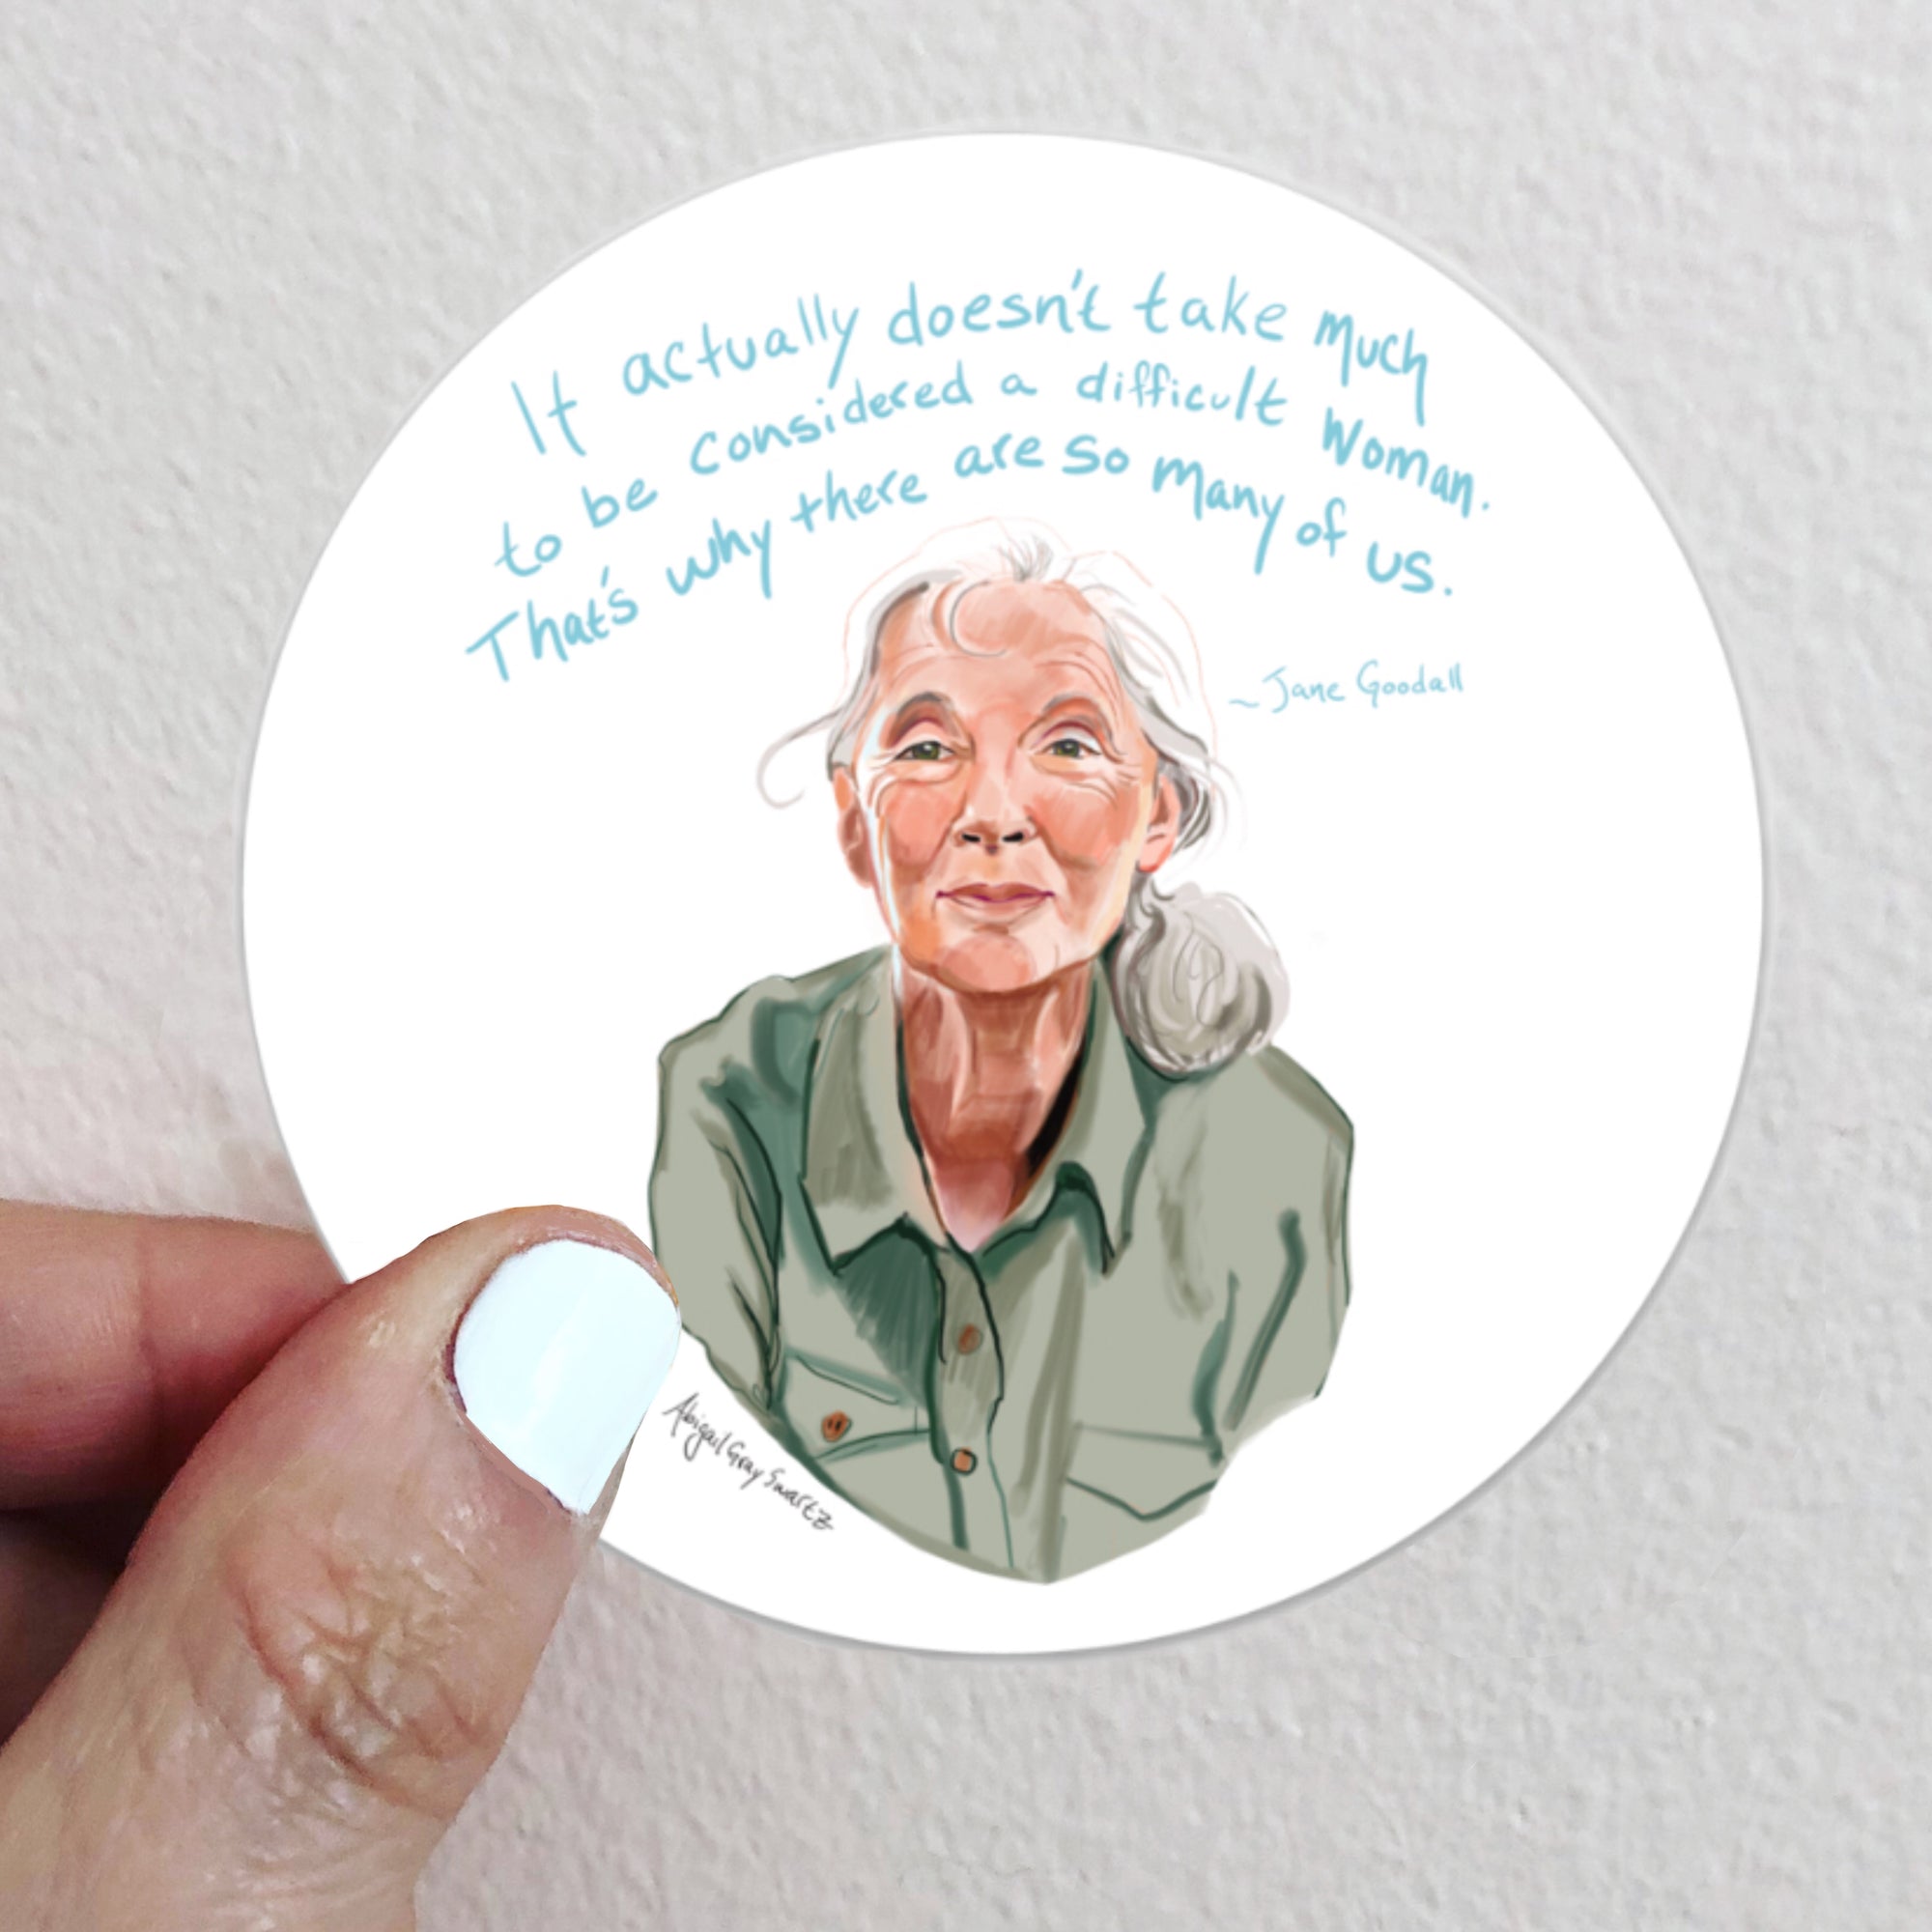 Jane Goodall quoted portrait sticker. “It actually doesn't take much to be considered a difficult woman. That's why there are so many of us.”